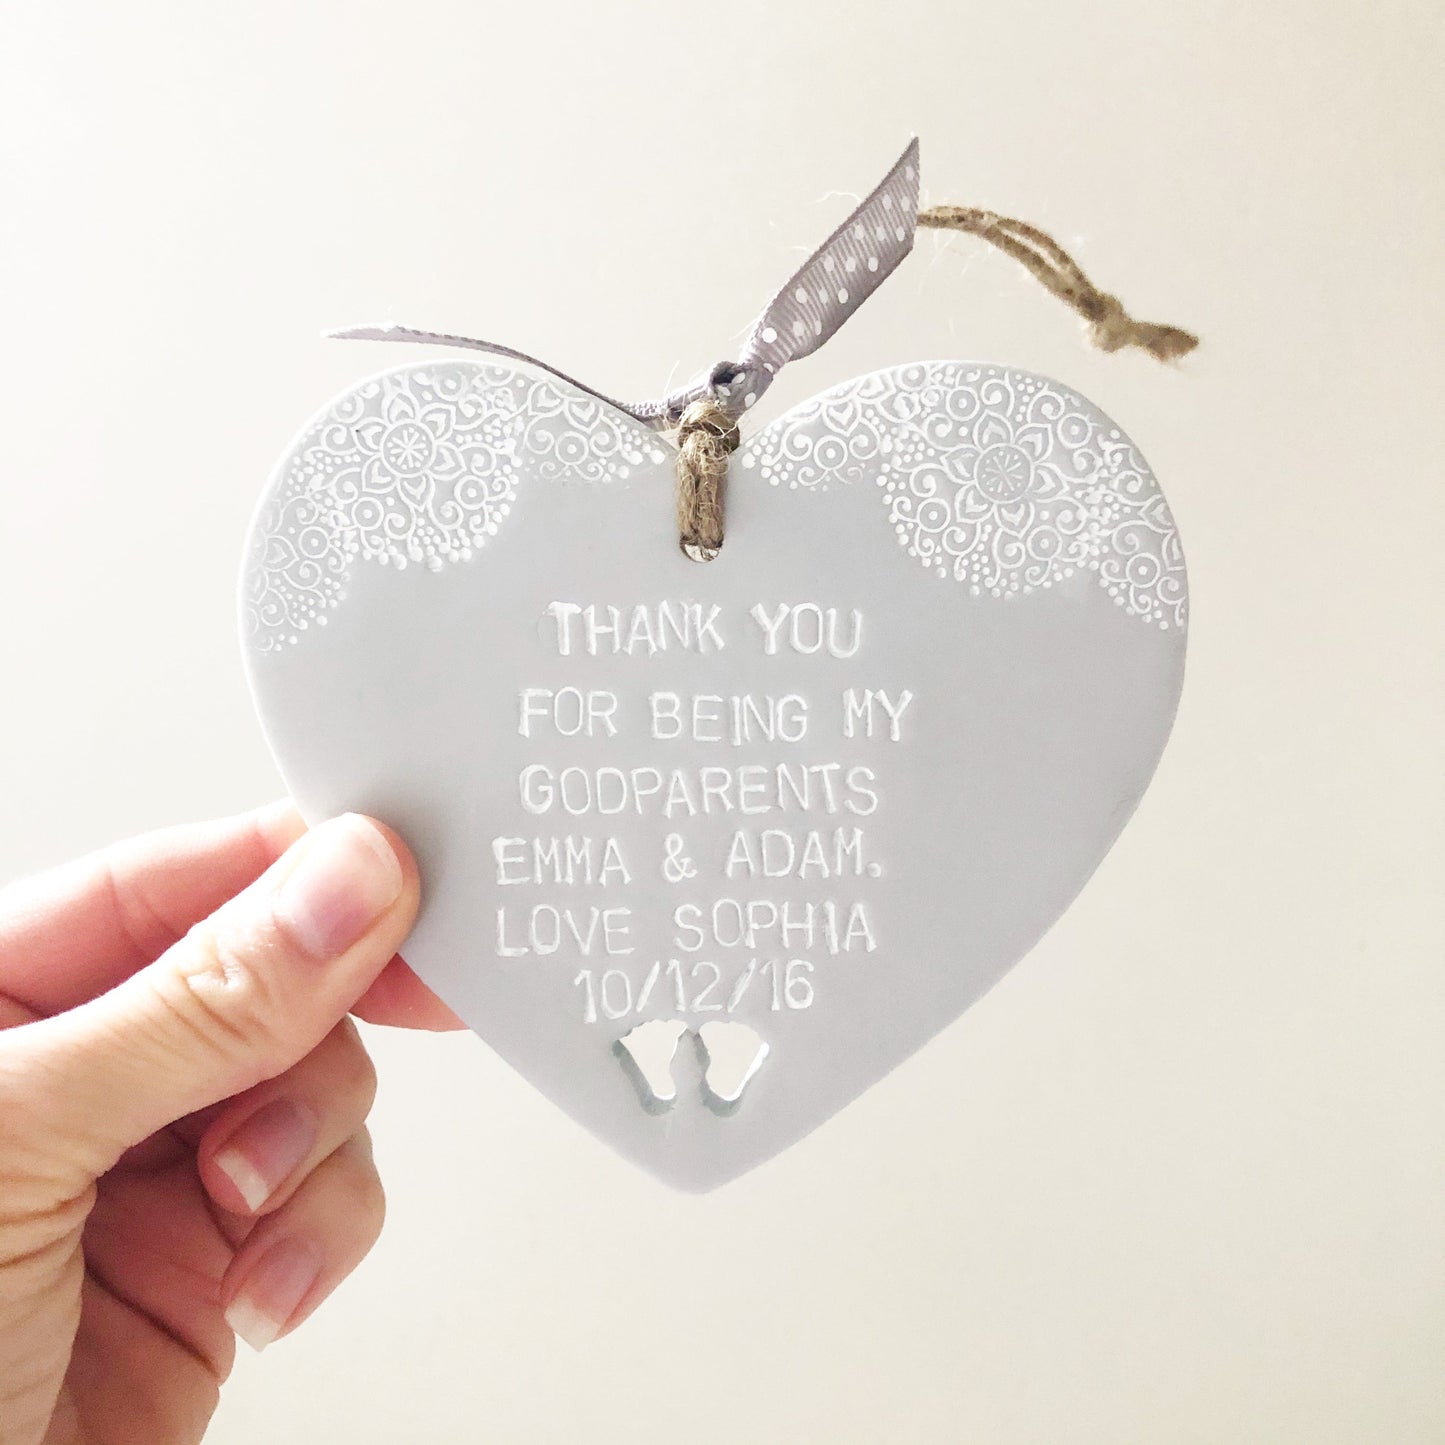 Personalised Godparent gift, grey clay hanging heart with baby feet cut out of the bottom and white lace edge at the top of the heart, the heart is personalised with THANK YOU FOR BEING MY GODPARENTS EMMA & ADAM, LOVE SOPHIA 10/12/16